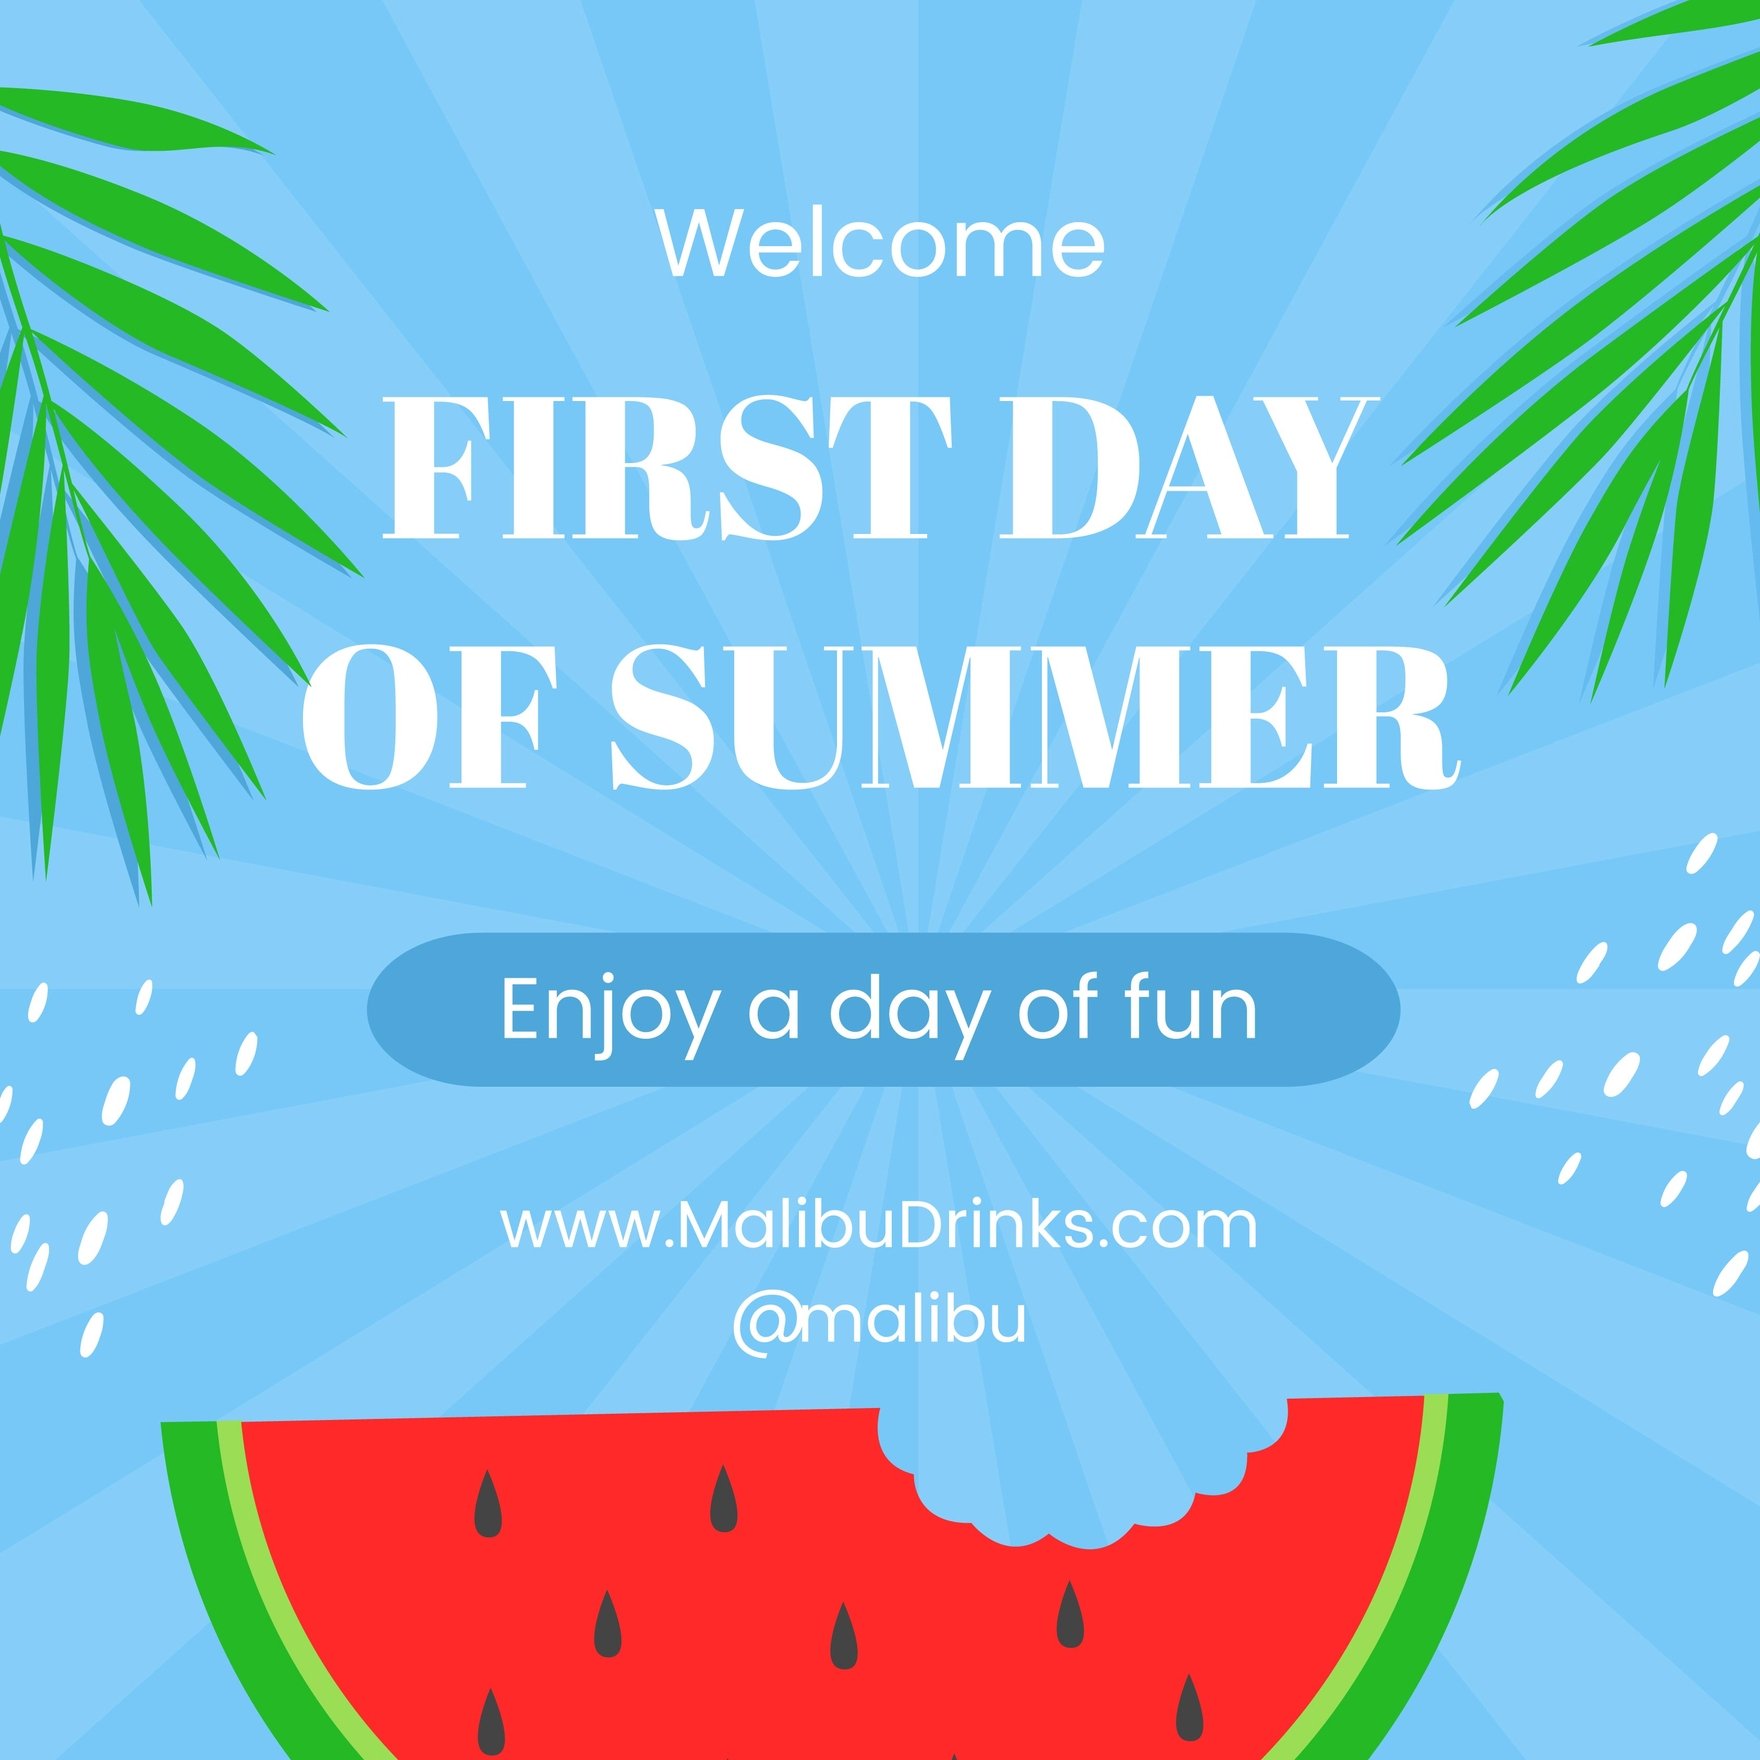 First Day of Summer FB Post